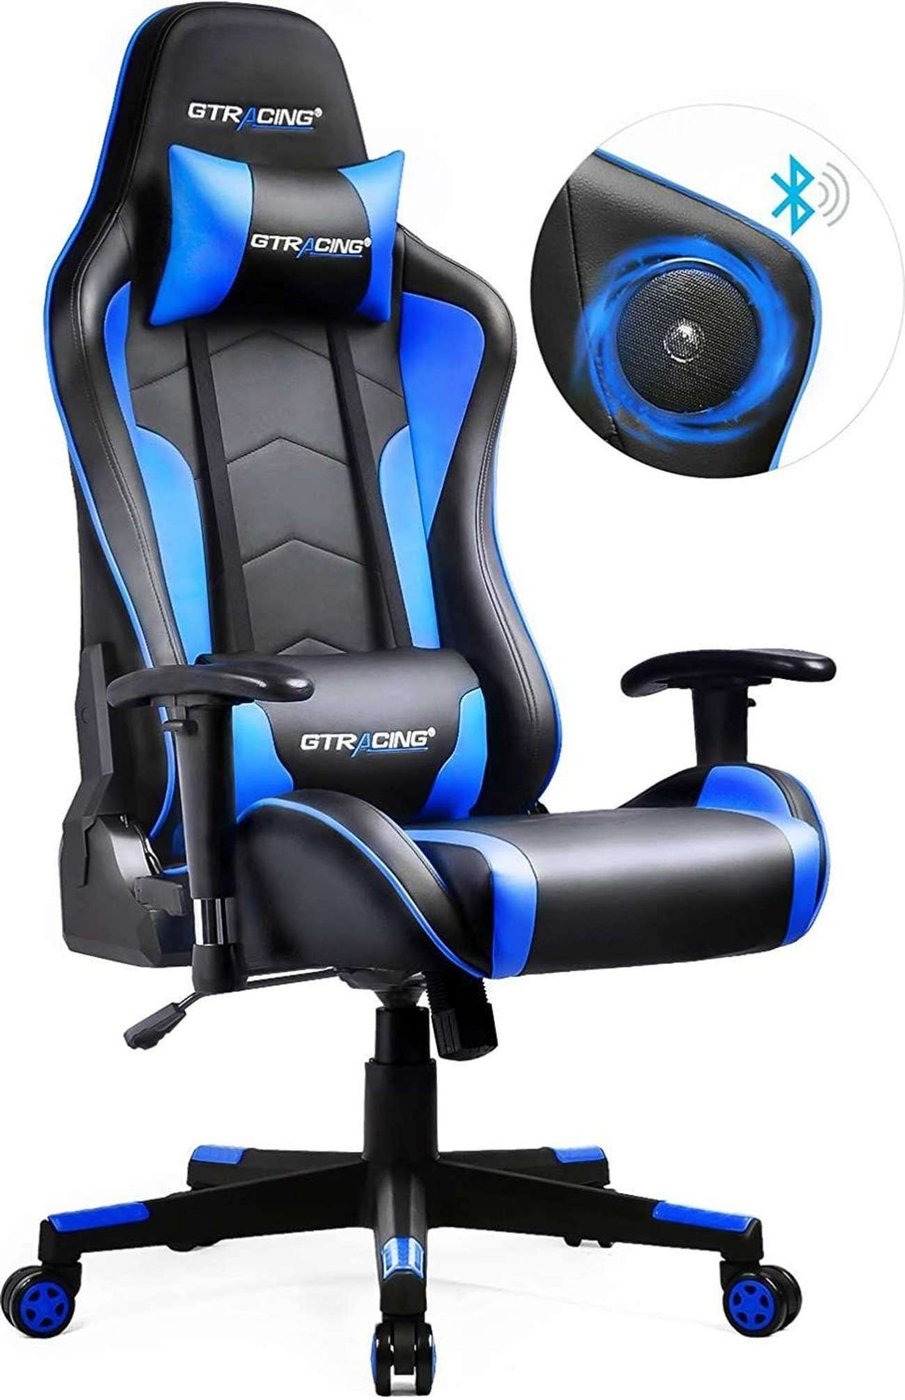 Gtracing Gaming Chair With Bluetooth Speakers ?s=art